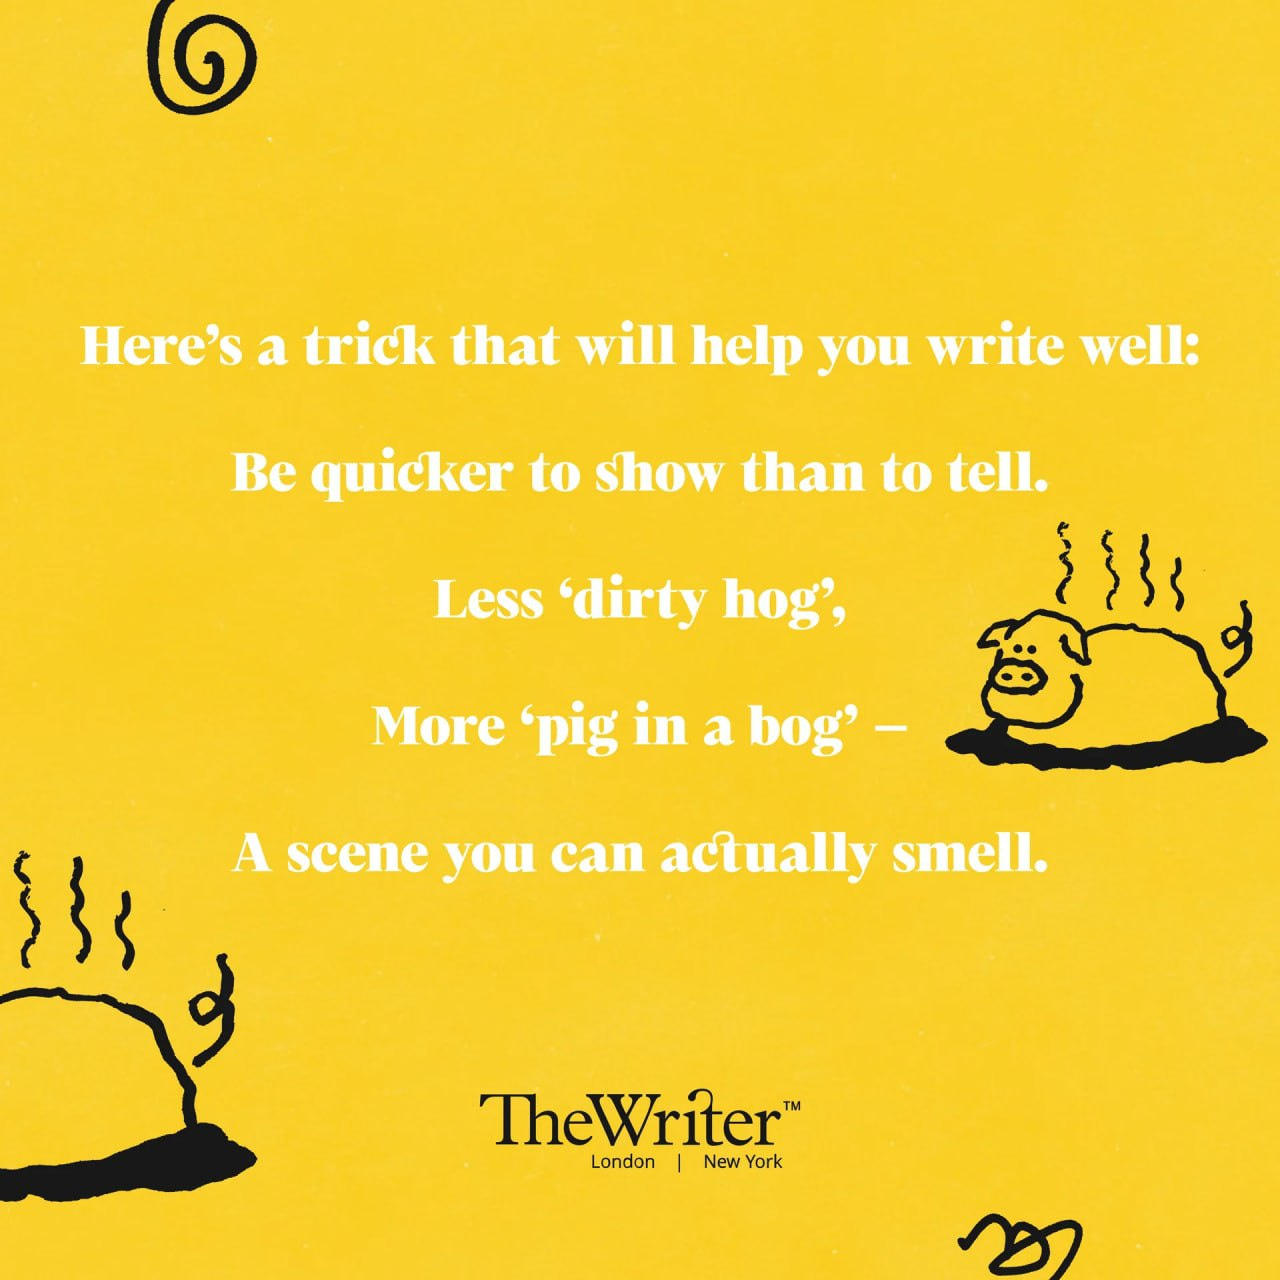 Here’s a trick that will help you write well: Be quicker to show than to tell. Less ‘dirty hog’, More ‘pig in a bog’ – A scene you can actually smell.